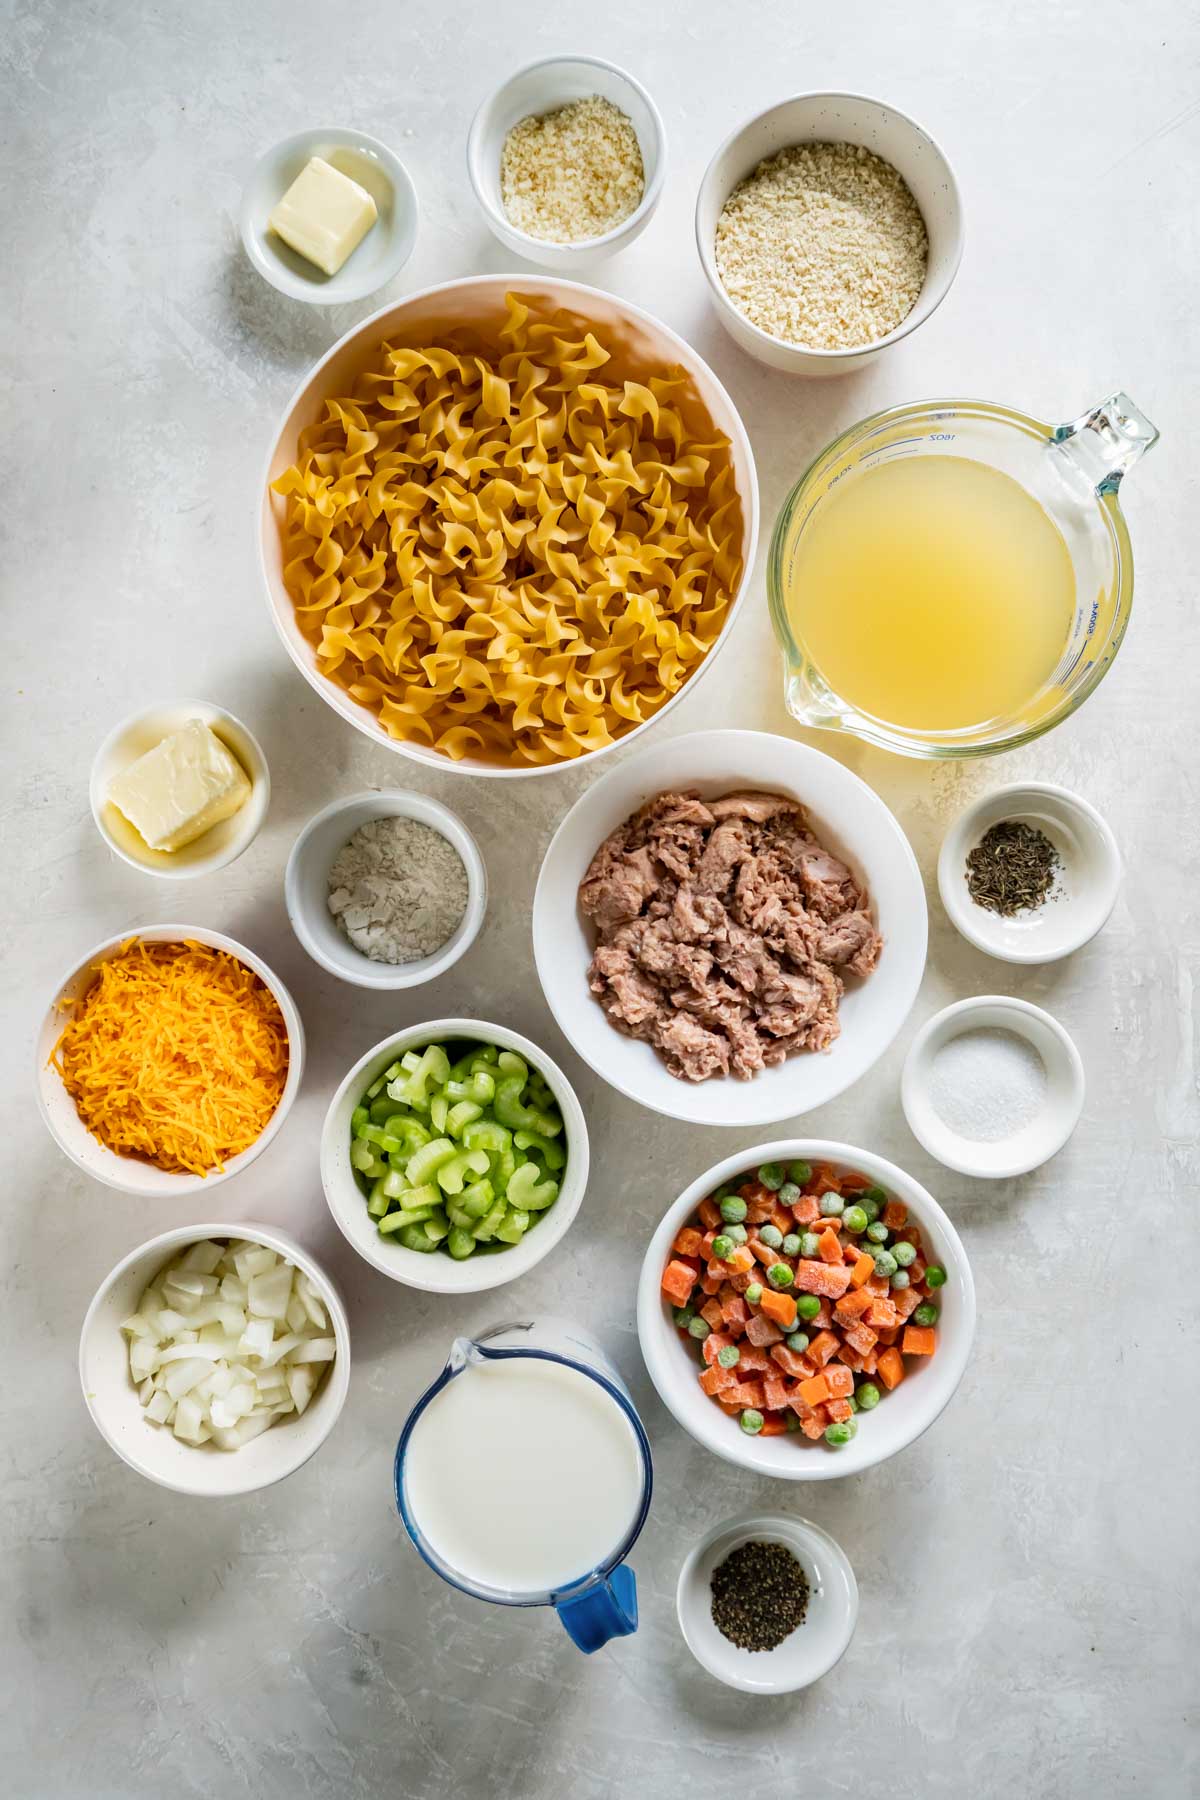 Ingredients for tuna noodle casserole recipe.